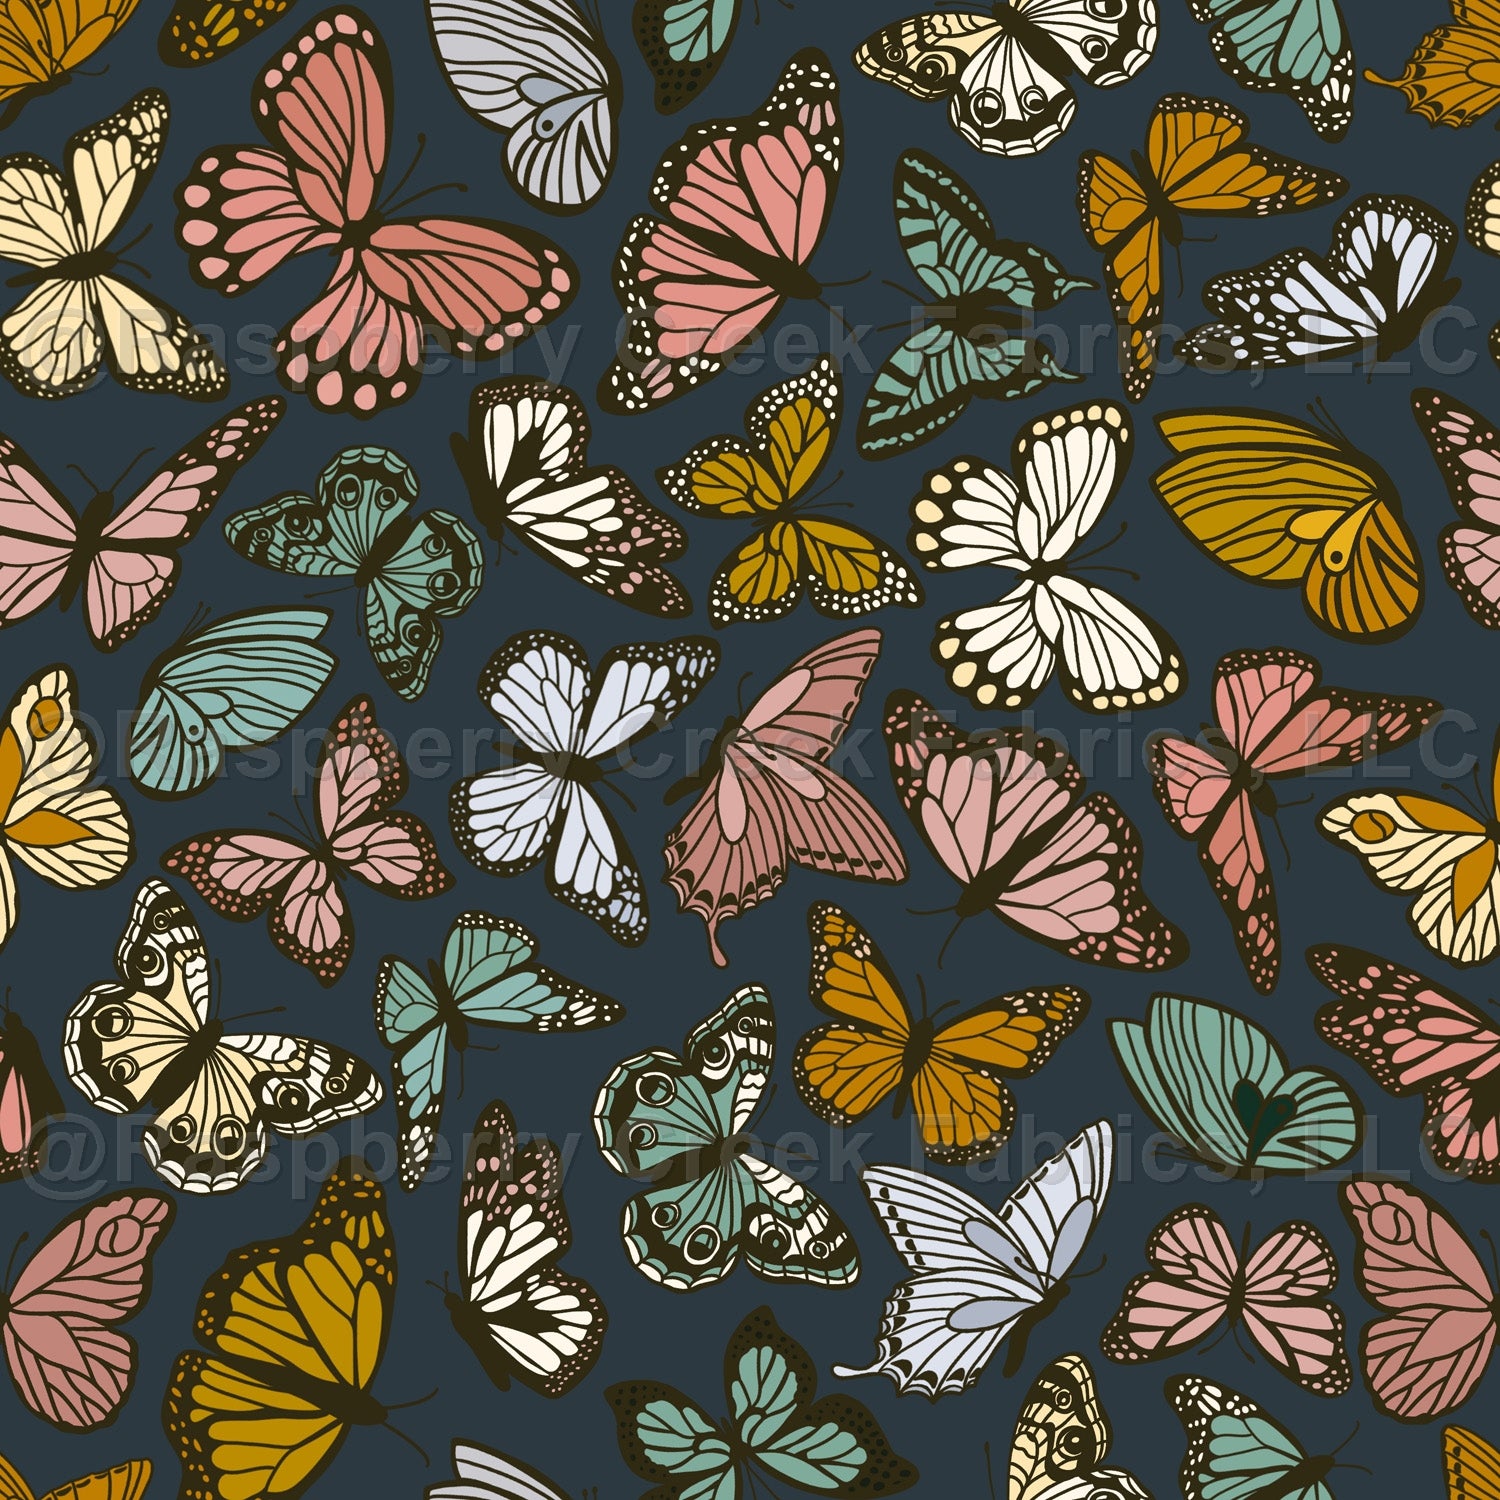 Rainbow Butterflies on Black Fabric By the Yard. Monarch Butterfly Pat –  Crafty Fabrics